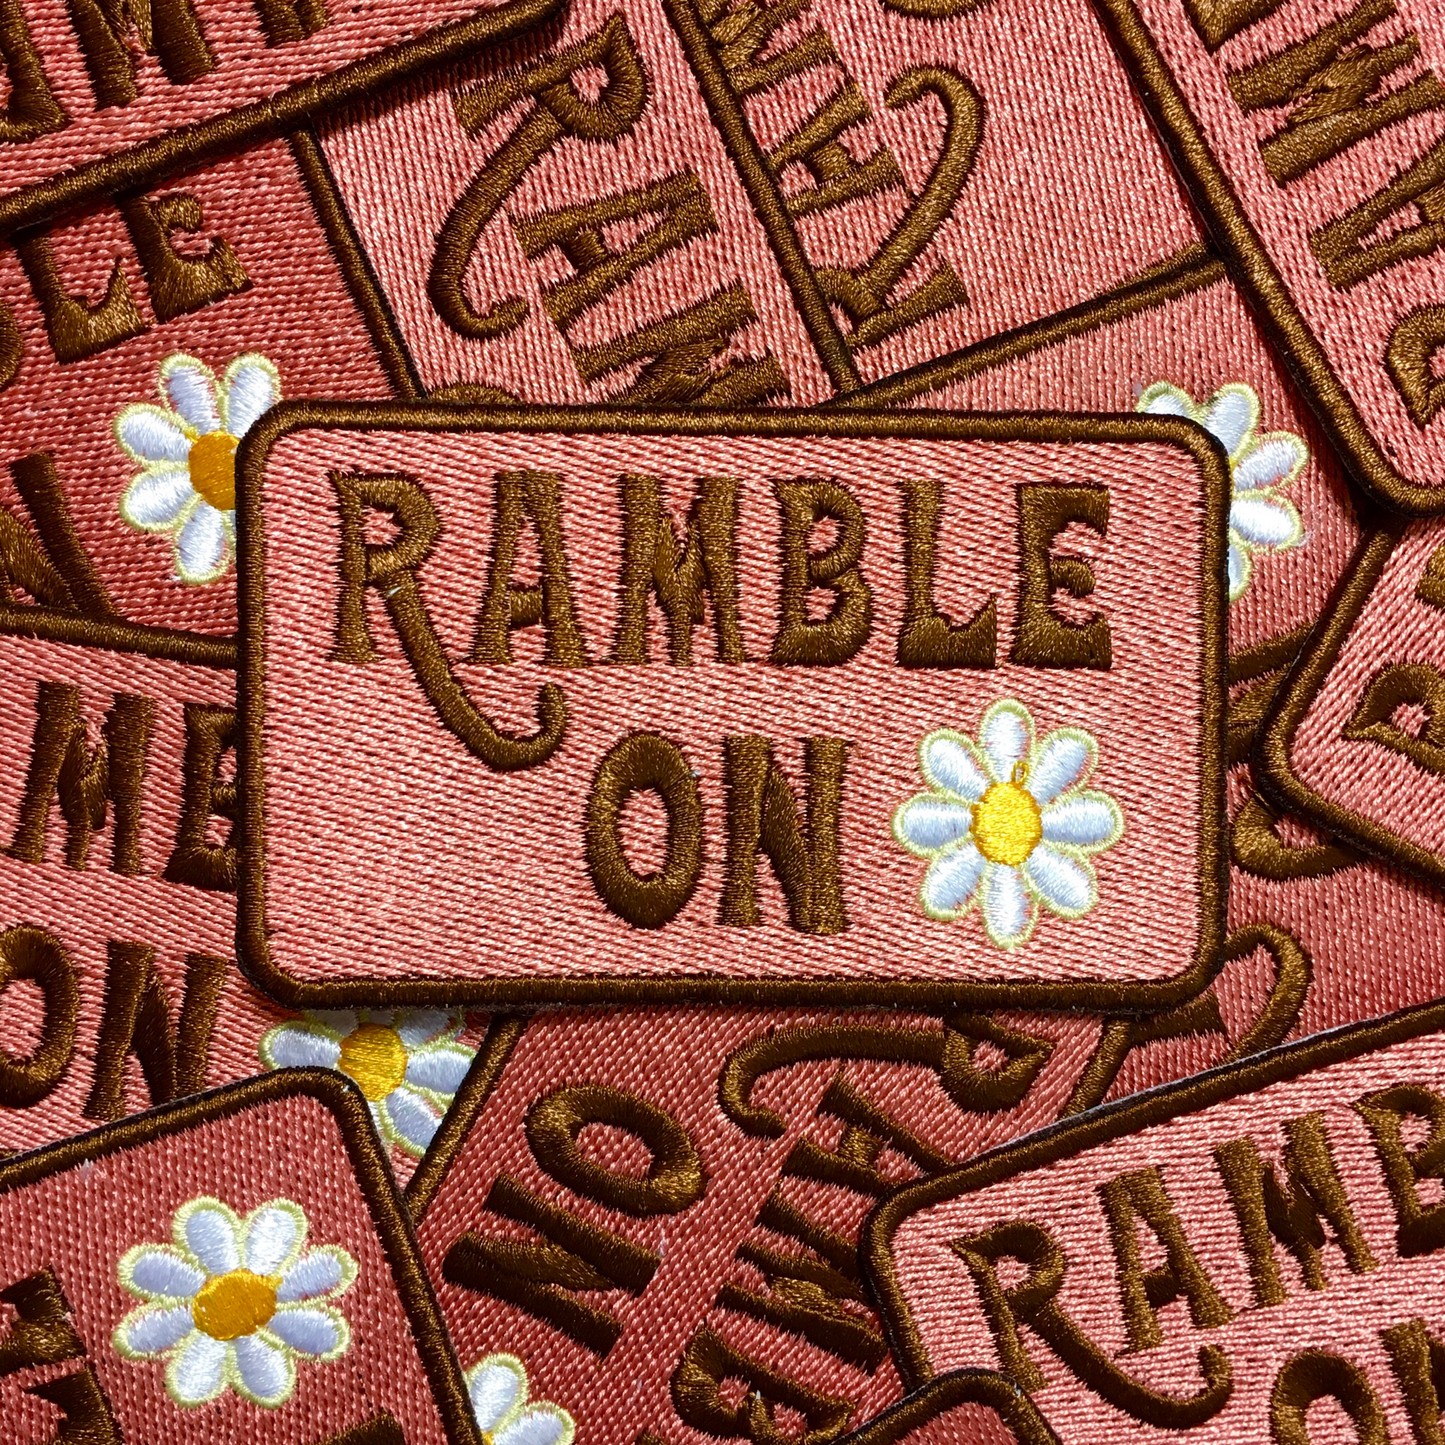 The Ramble On Patch